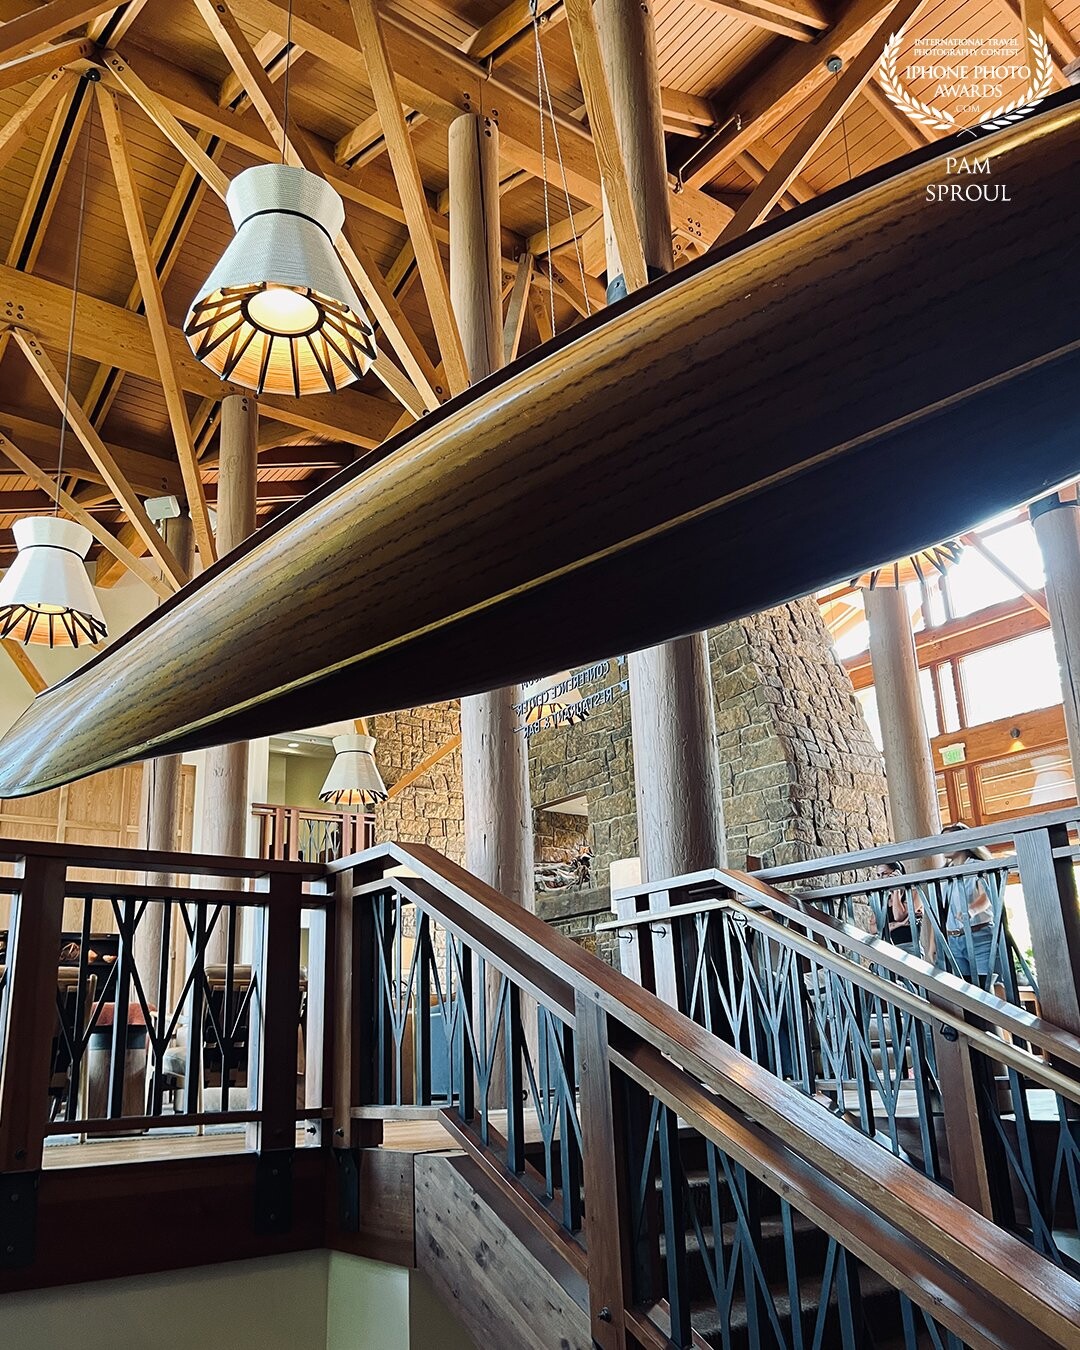 This kayak suspended against the beautiful architecture of the Alderbrook Lodge caught my eye with it’s beauty<br />
<br />
“Pacific NW Lodge Art”-2022